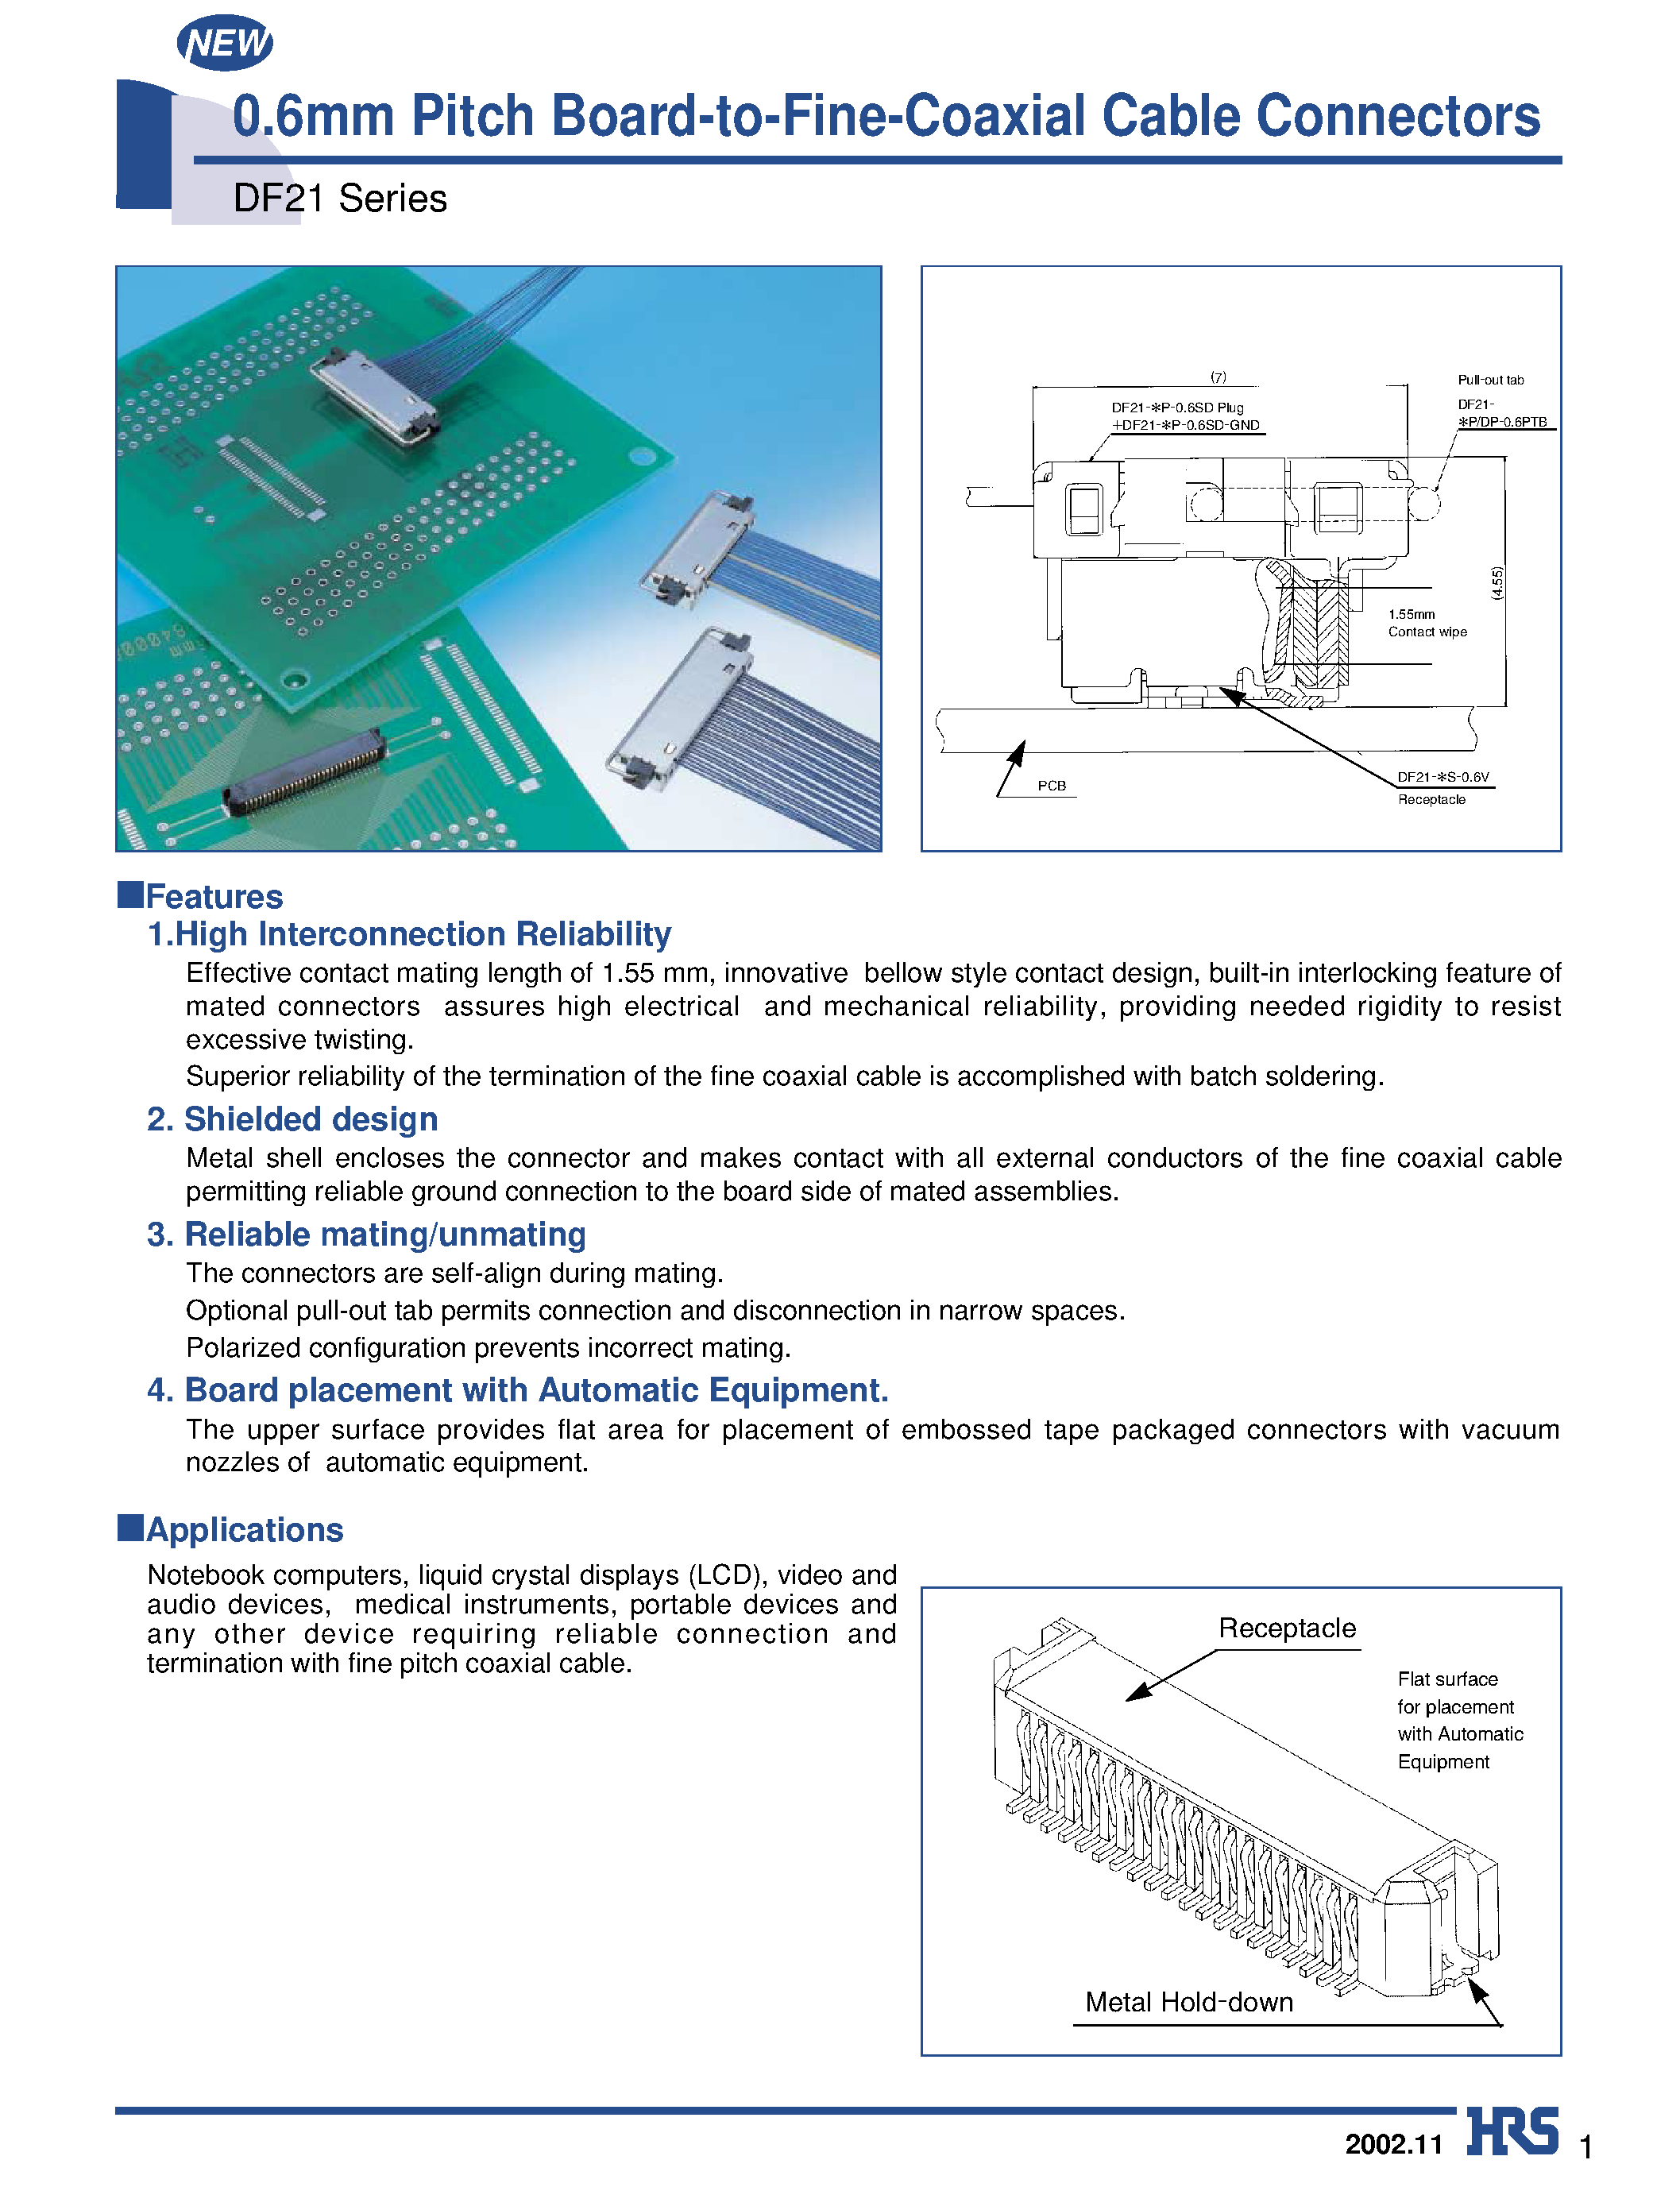 Datasheet DF21-20P-0.6SD-GND - 0.6mm Pitch Board-to-Fine-Coaxial Cable Connectors page 1